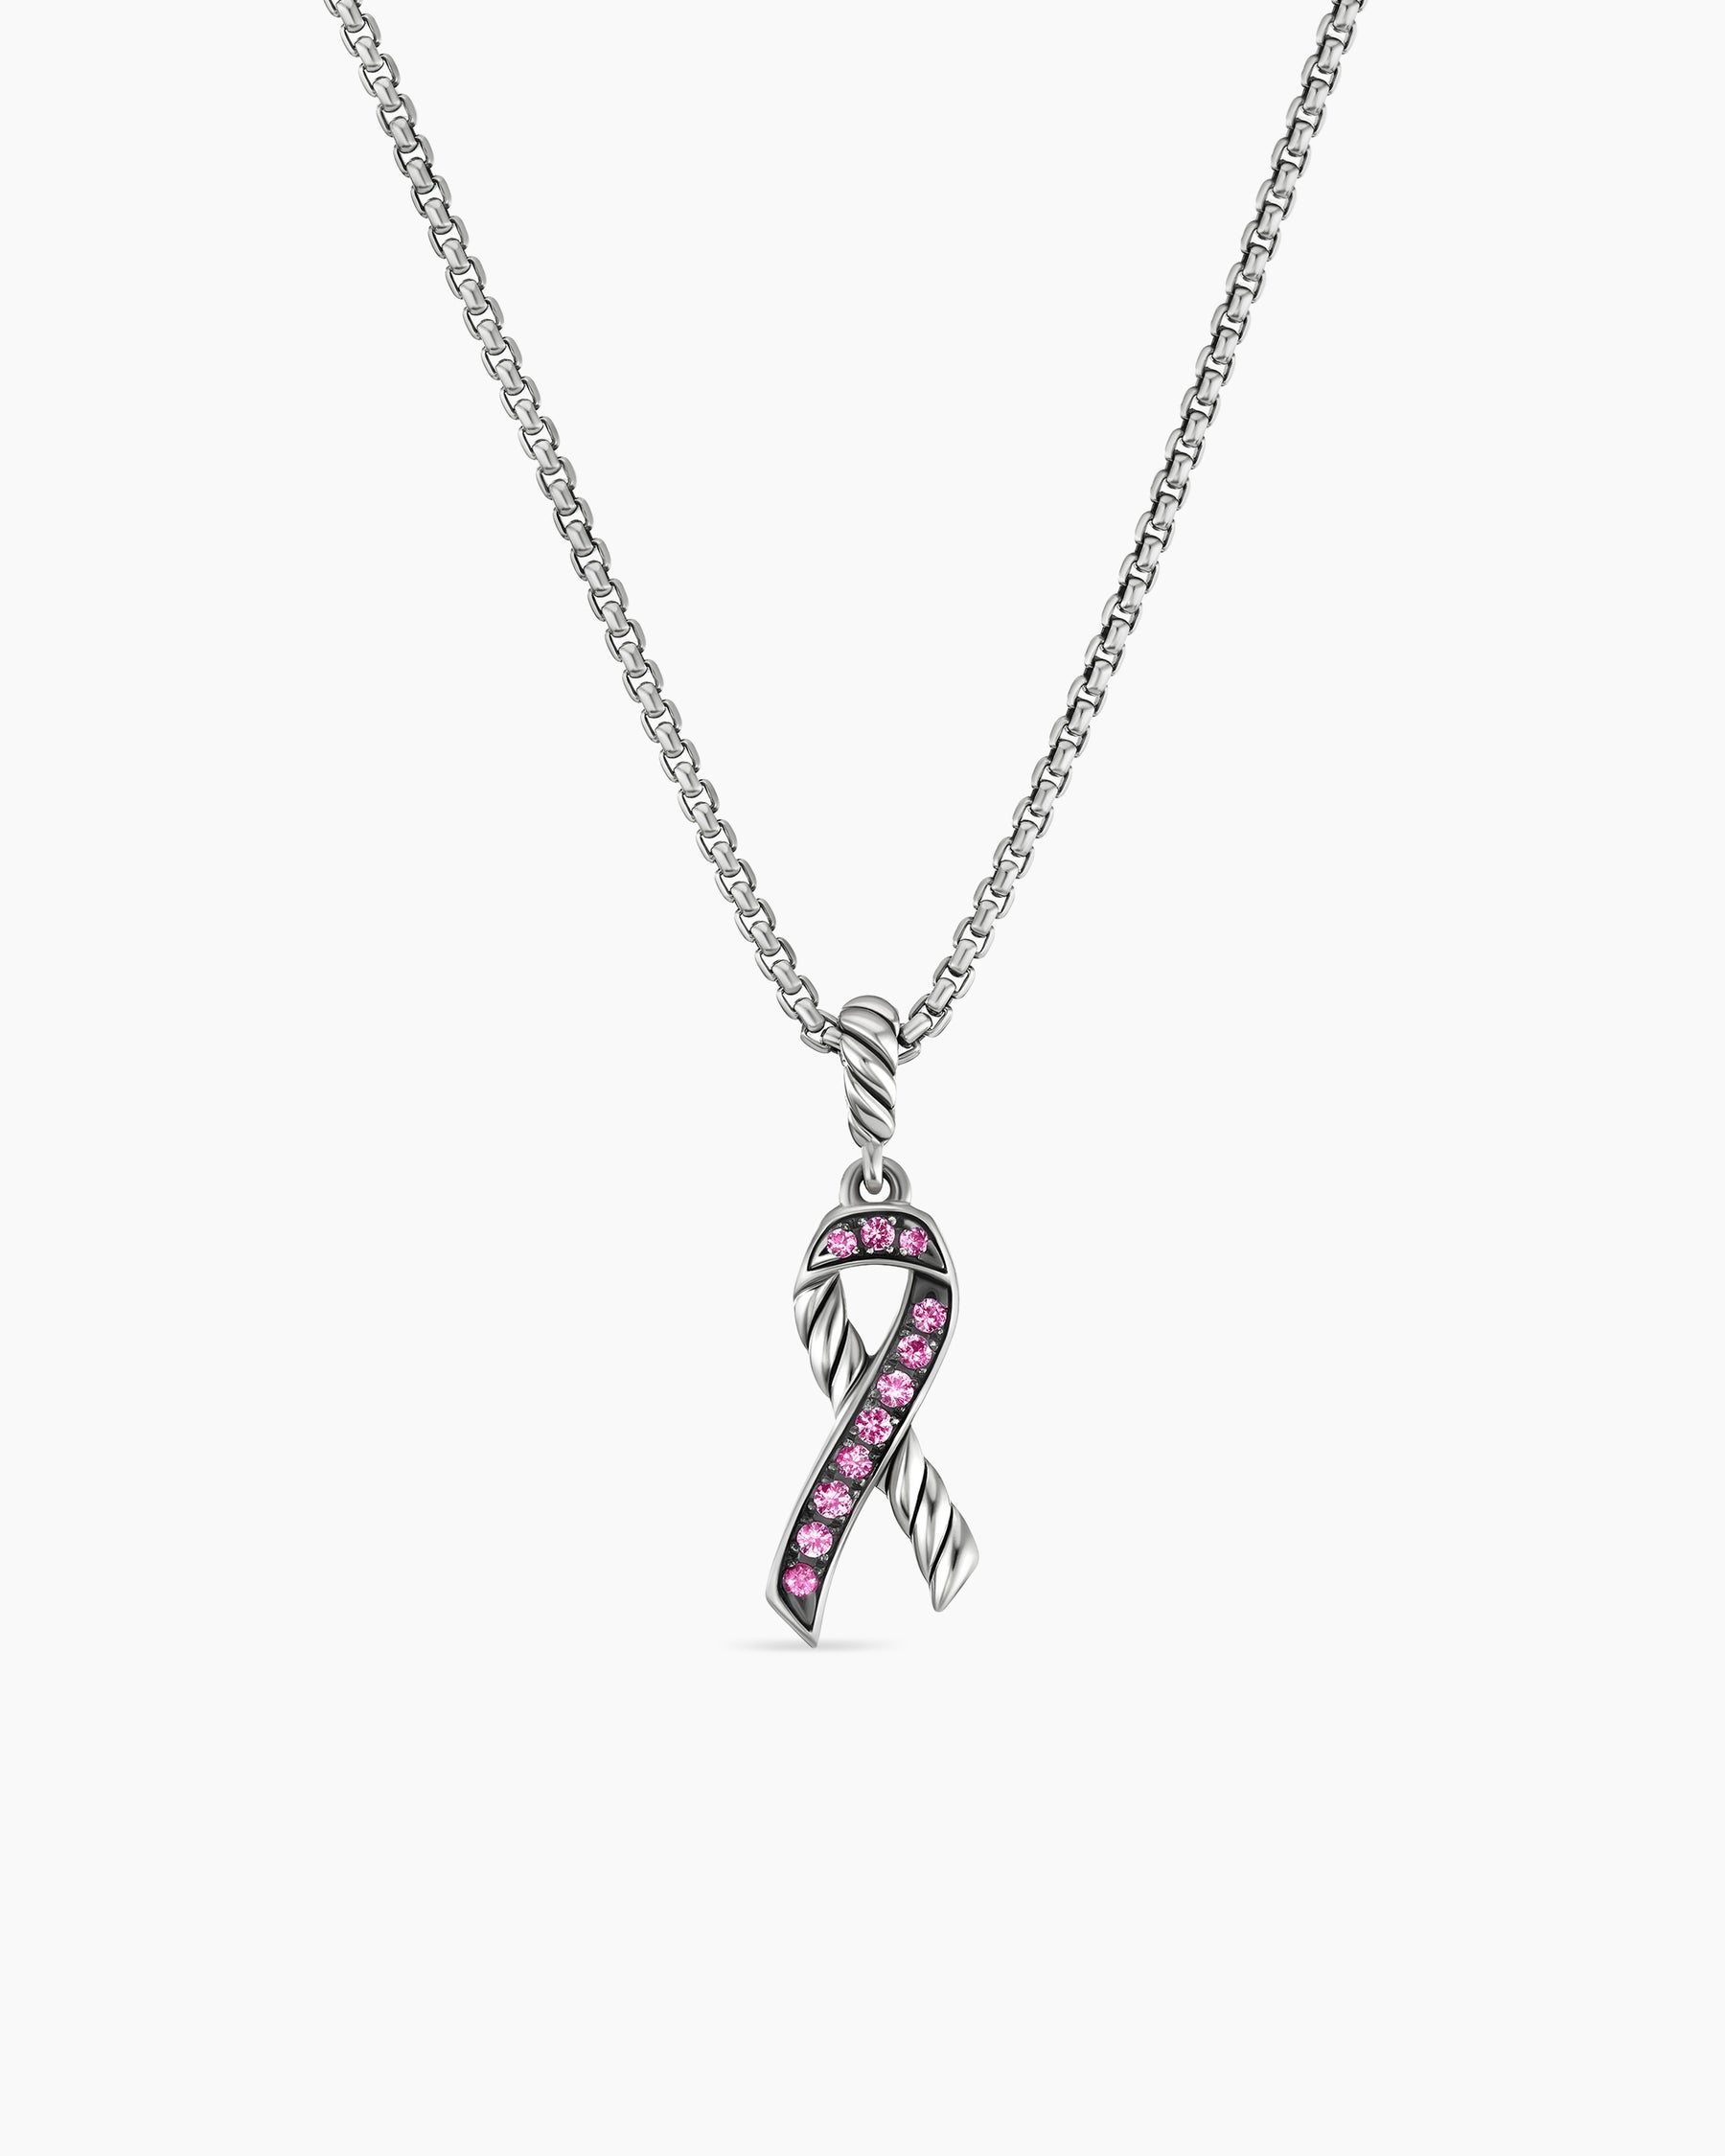 Key Chain Breast Cancer Pink Ribbon, multiple options!